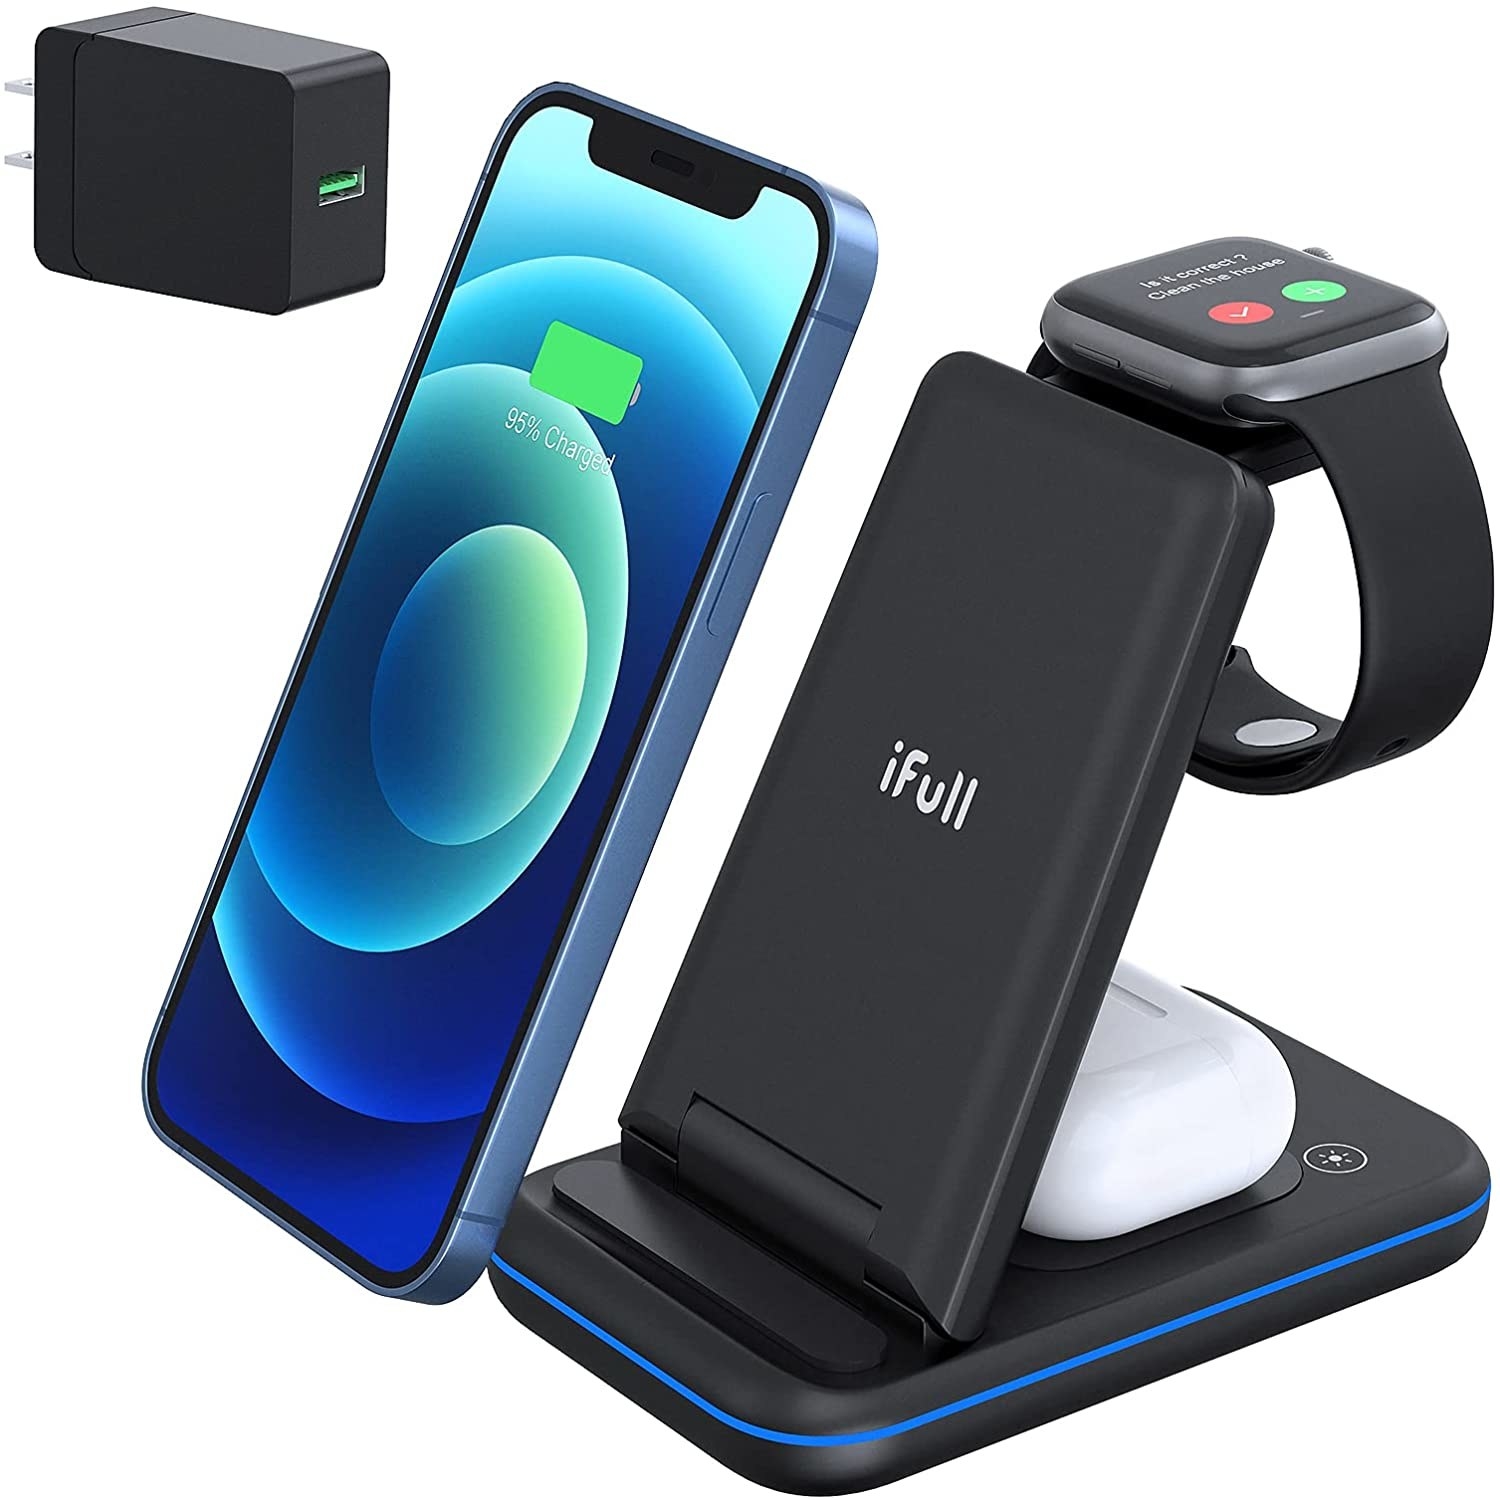 Several gadgets on the charging stand